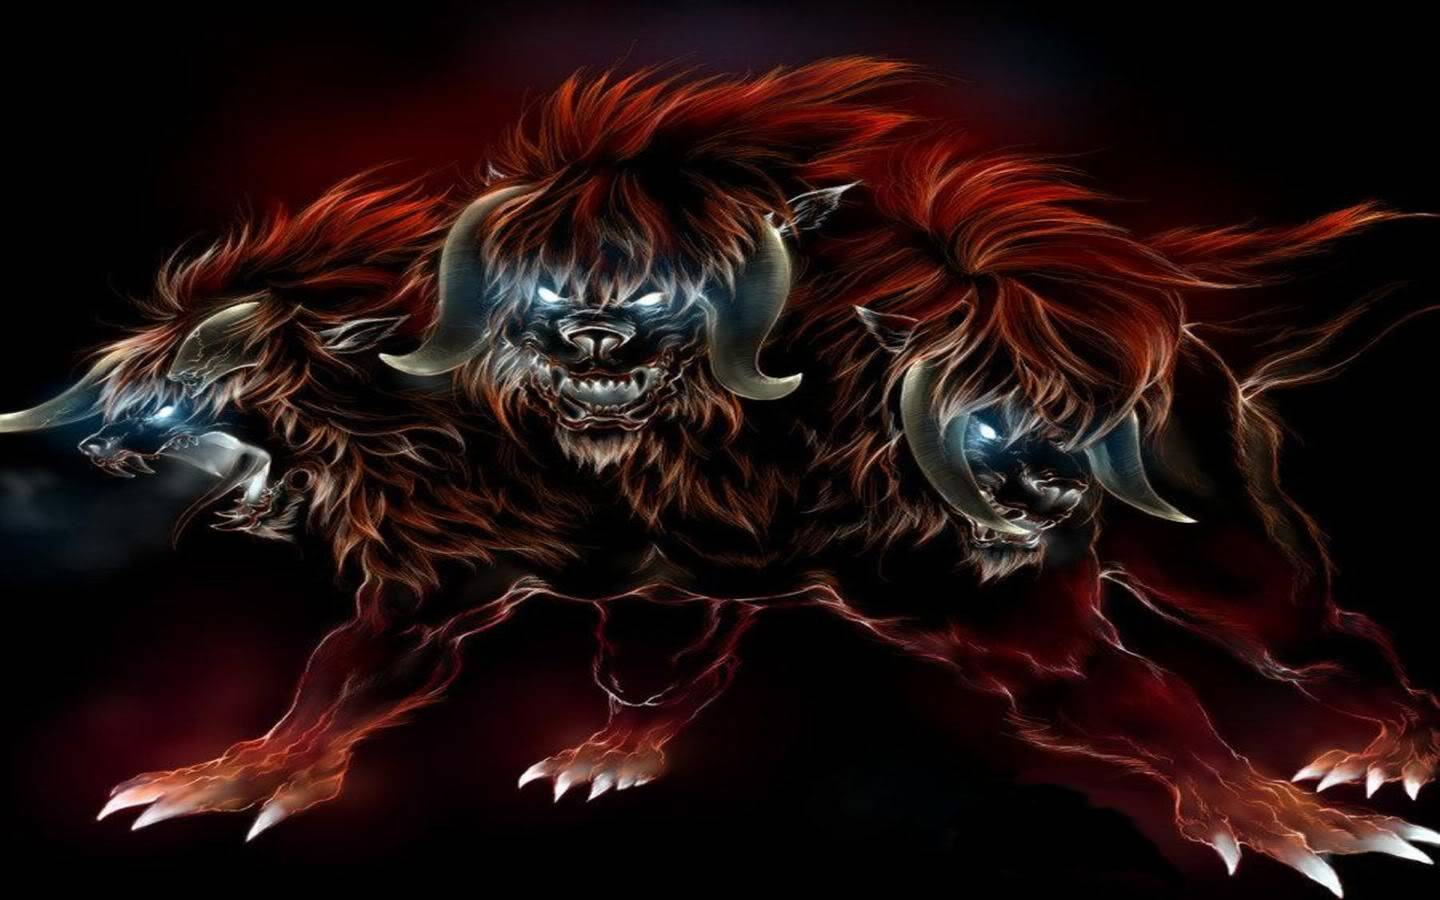  commythical creaturesimage304254cerberus illustration wallpaper 1440x900